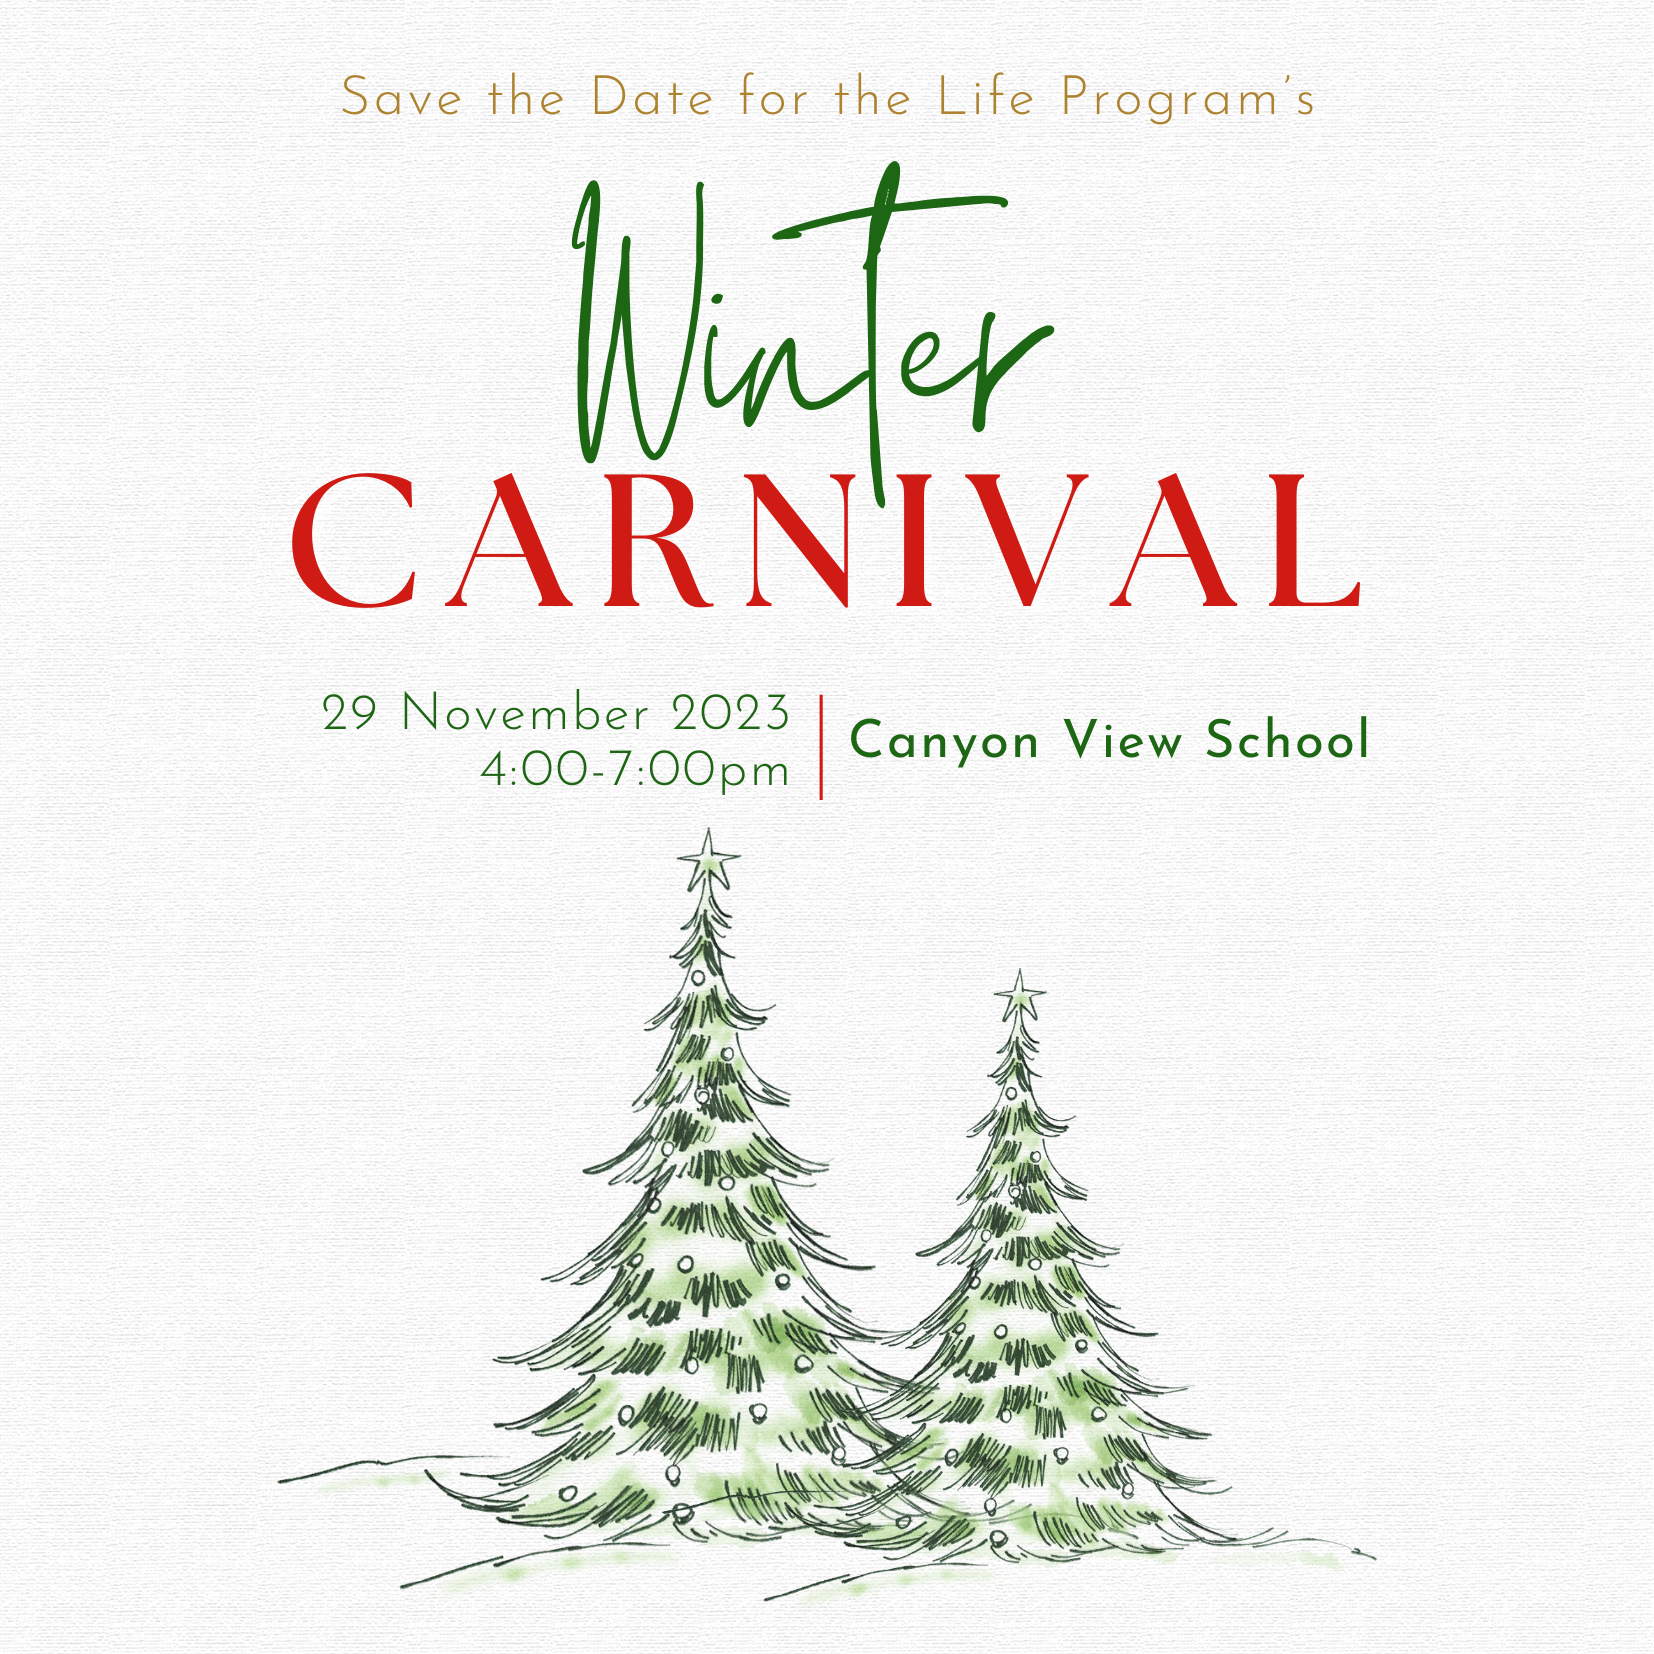 Save the date for the Life Program's Winter Carnival - 29 November 2023 - 4:00-7:00PM - Canyon View School